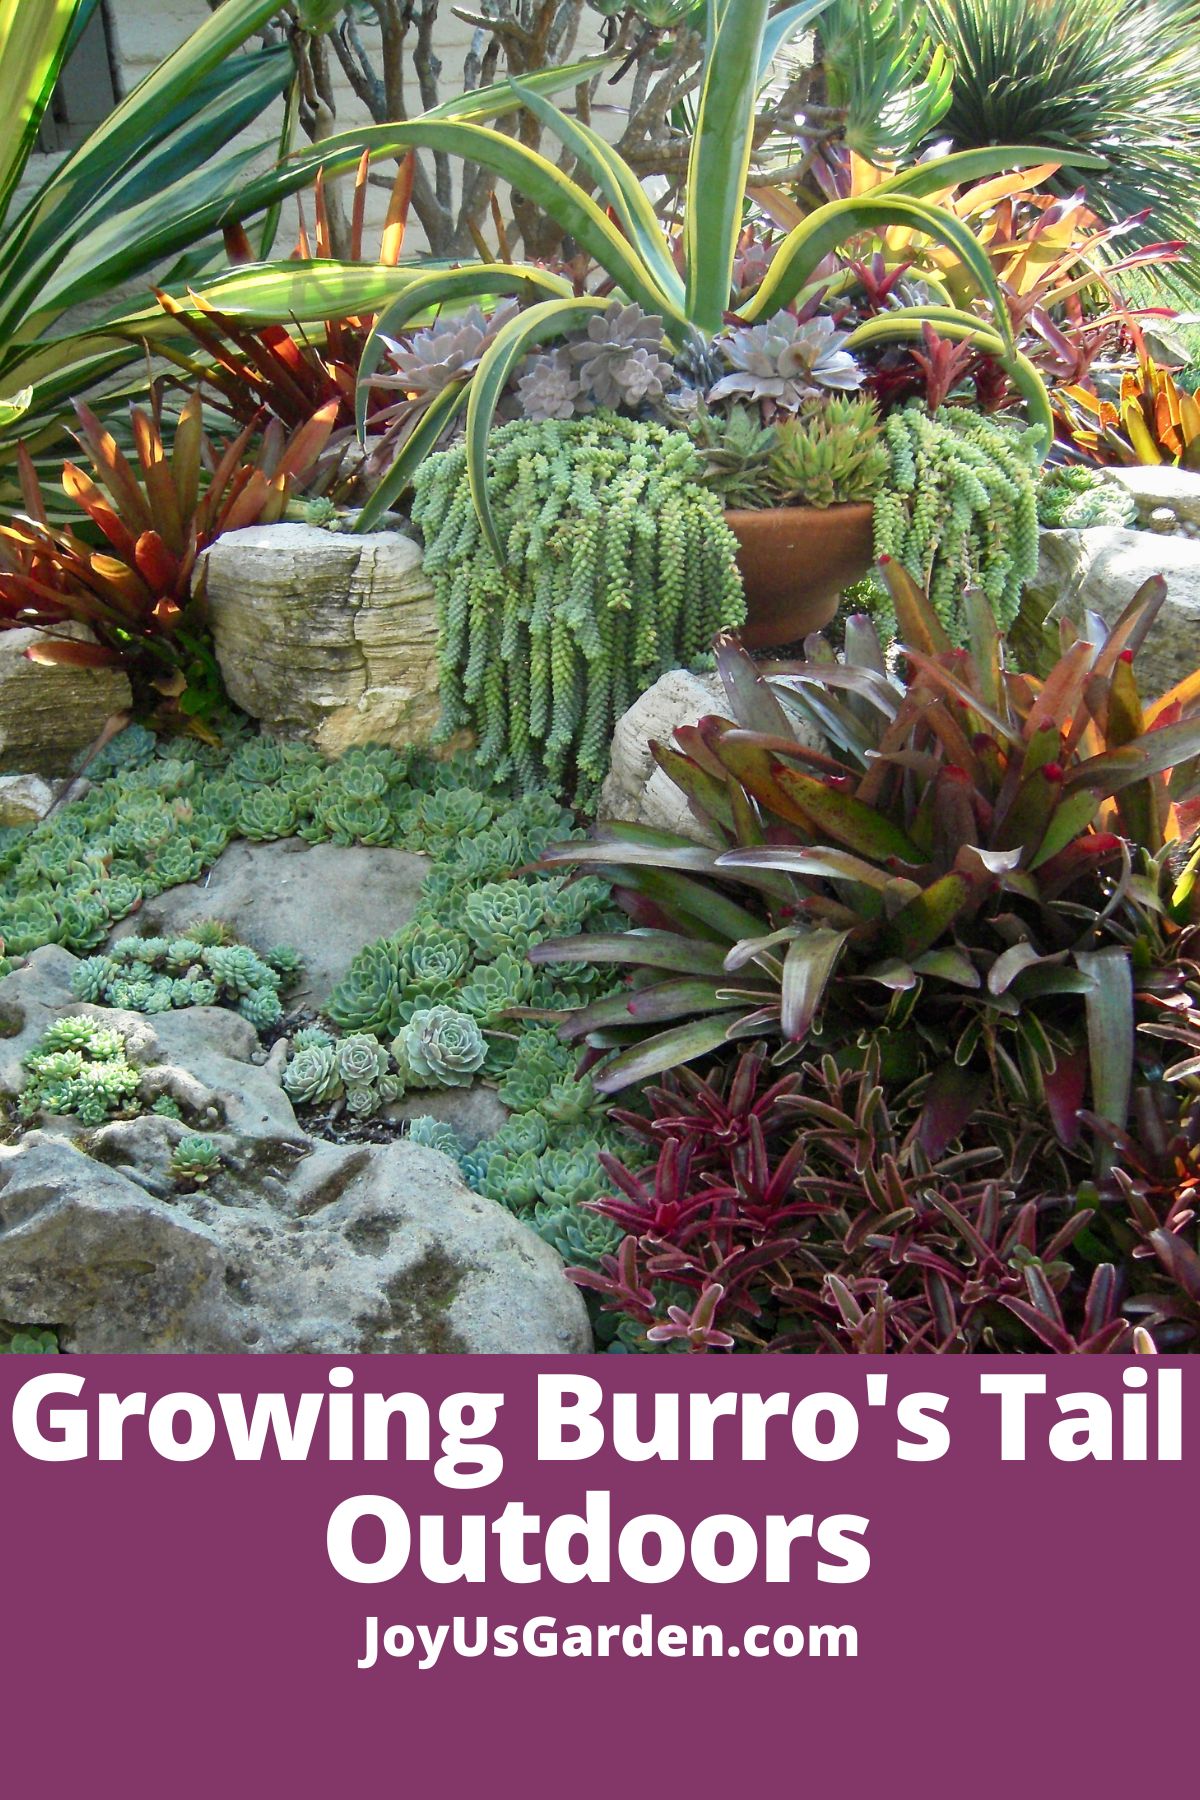 succulent garden succulents planted on rocky hill along side agaves burros tail in bowl planter text reads growing burros tail outdoors joyusgarden.com